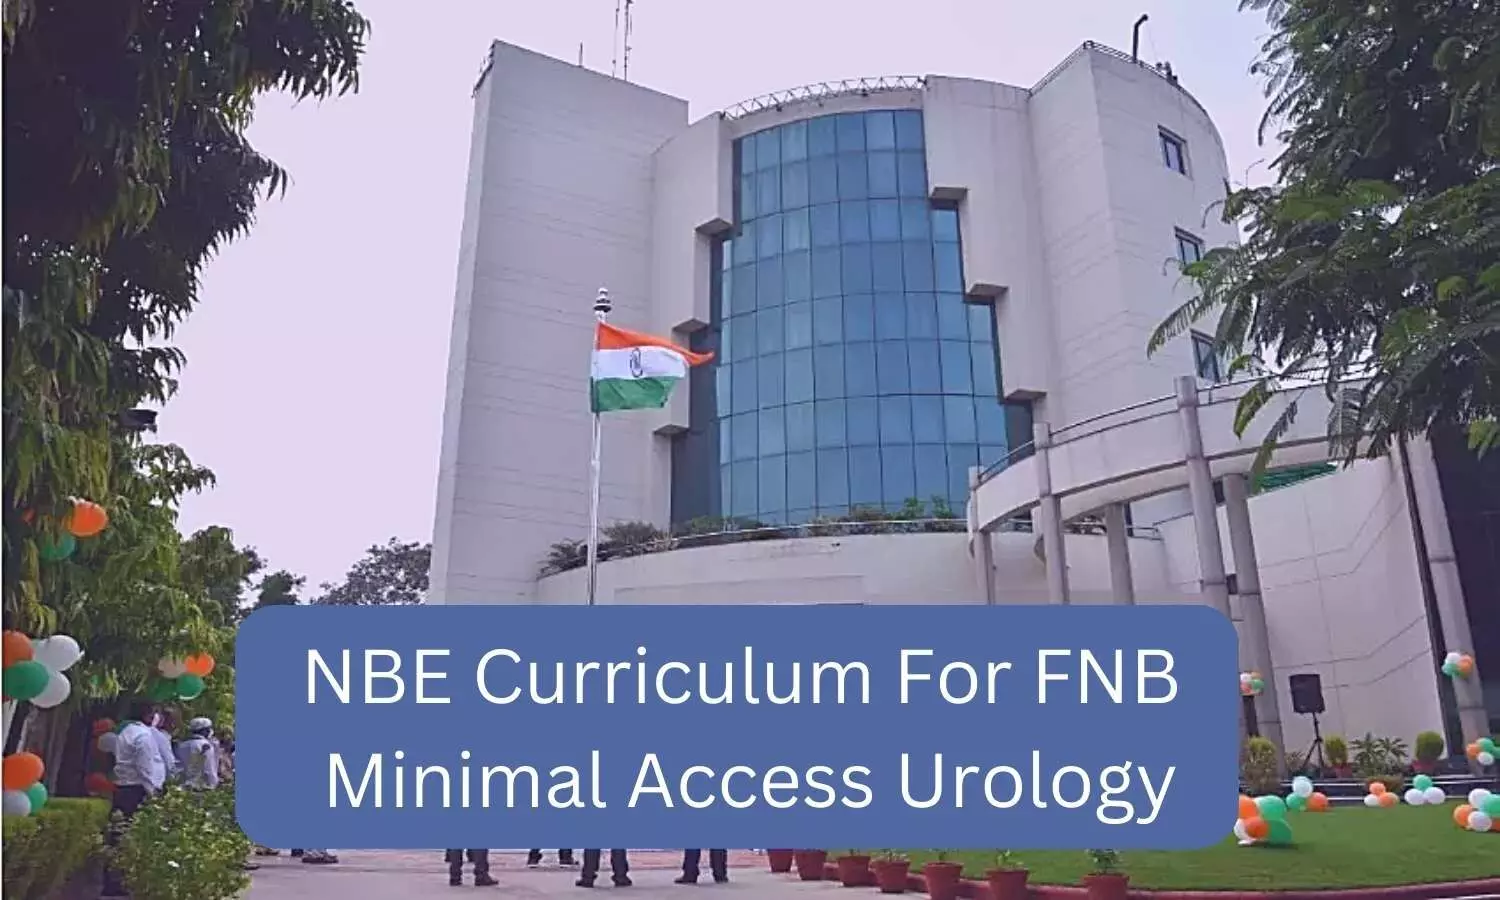 FNB Minimal Access Urology: Check Out NBE Released Curriculum